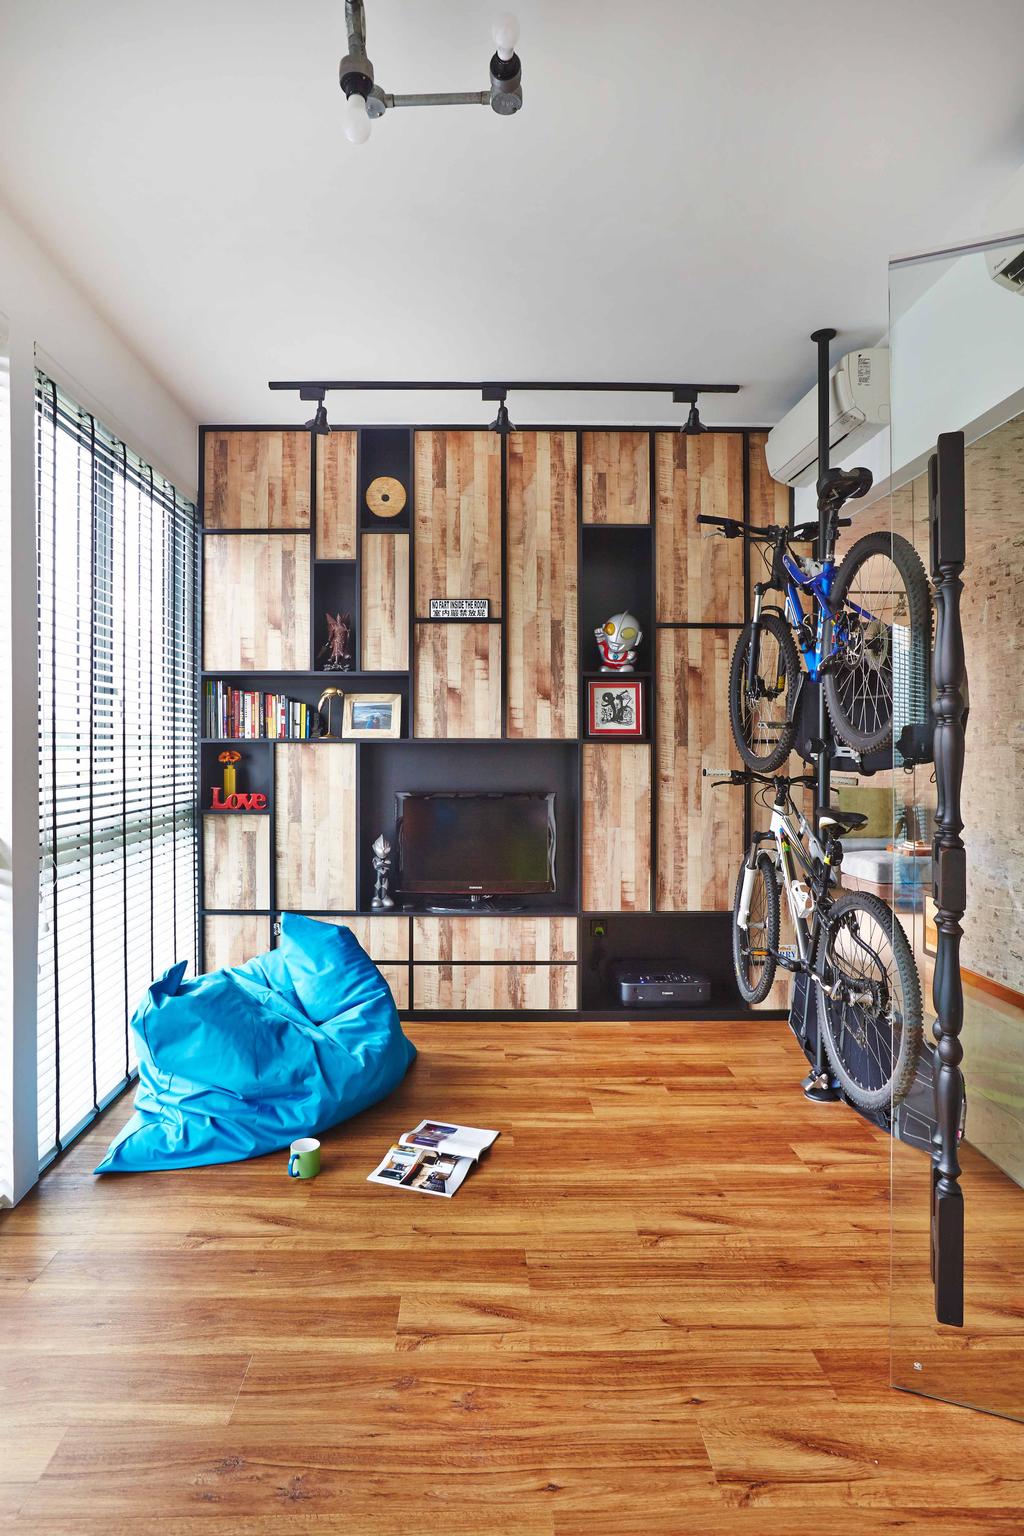 Eclectic, Condo, Living Room, The Canopy, Interior Designer, Fuse Concept, Black Track Lights, Bicycle Rack, Wooden Flooring, Brown Floor, Wooden Laminate, Laminated Floor, Wooden Wall, Venetian Blinds, Bean Bag, Blue, Wall Shelf, In Built Shelves, Open Shelves, Bicycle, Bike, Transportation, Vehicle